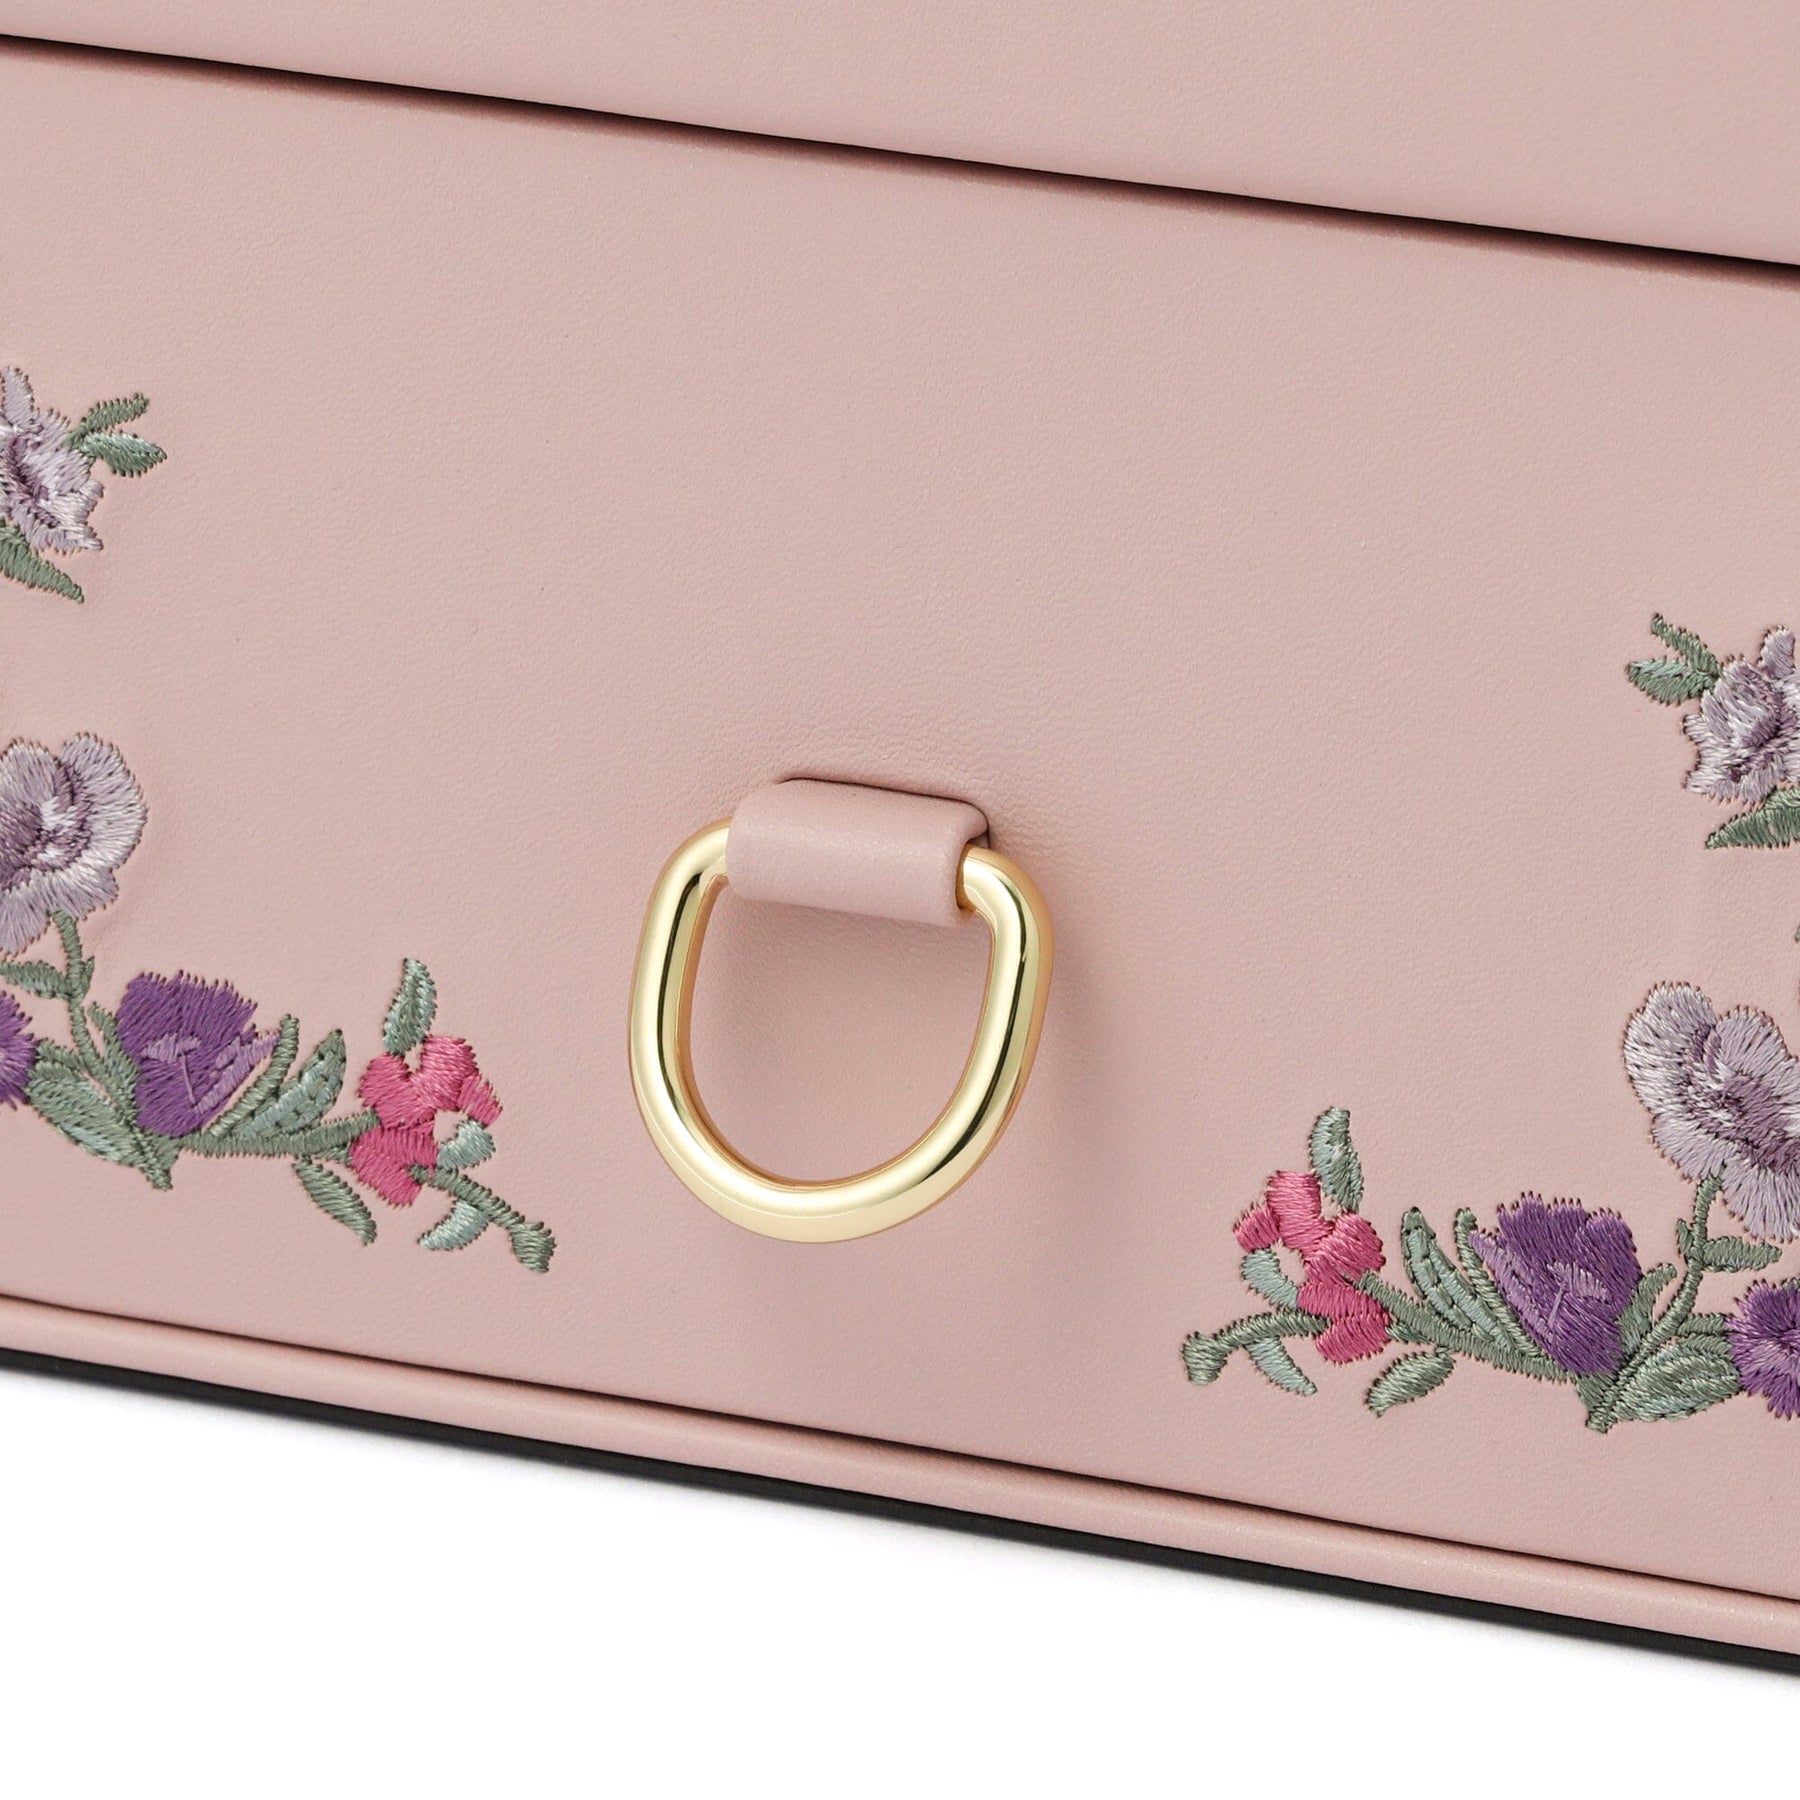 Embroidery Flower Jewelry Box Pink – Francfranc Hong Kong